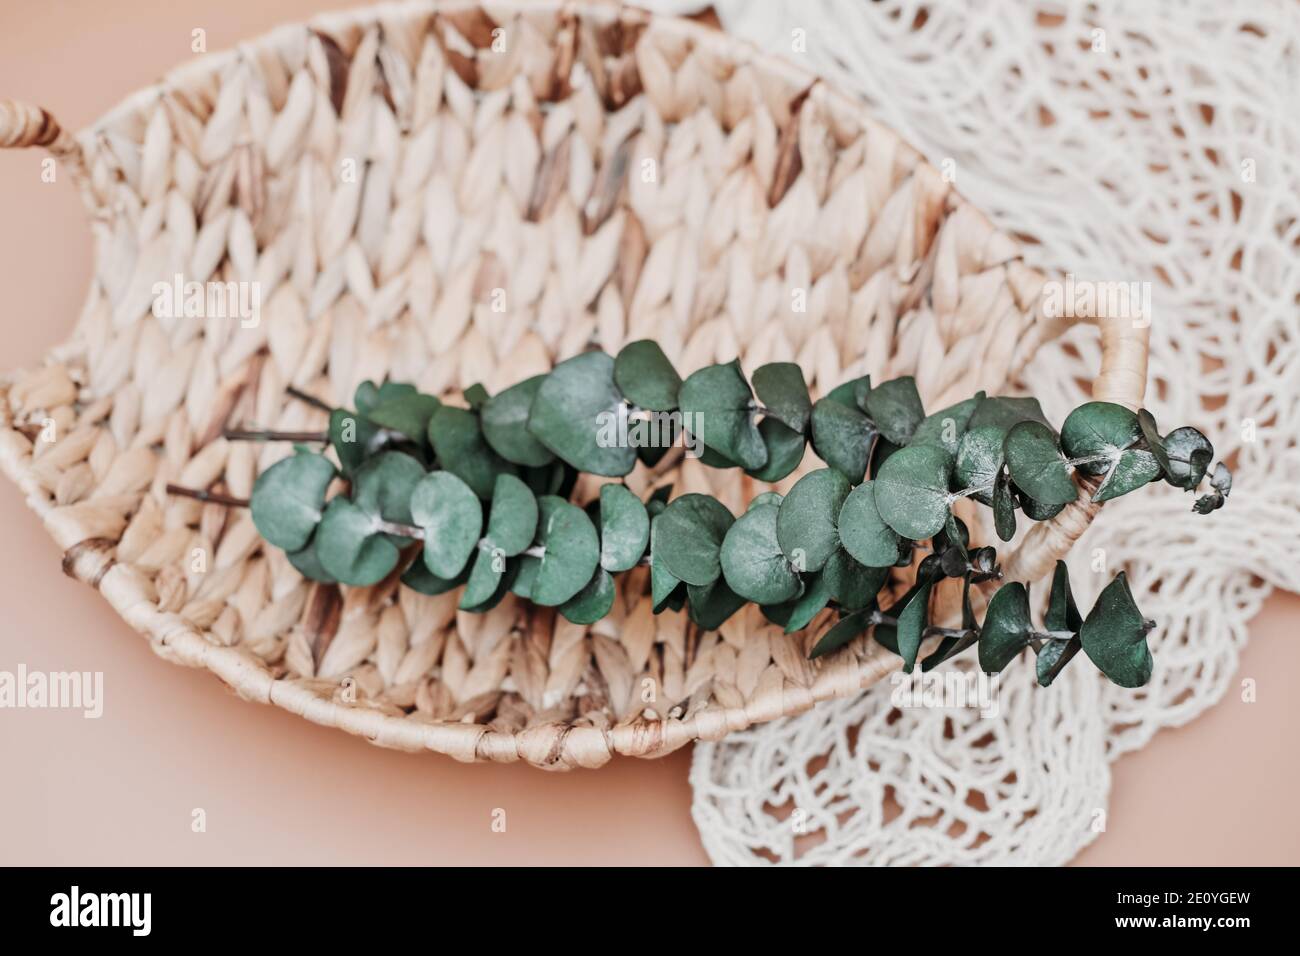 Wicker straw basket made of recycled materials. grocery mesh string eco bag.  sustainable shopping and home. recycled material gifts. eucaliptus leaves  Stock Photo - Alamy